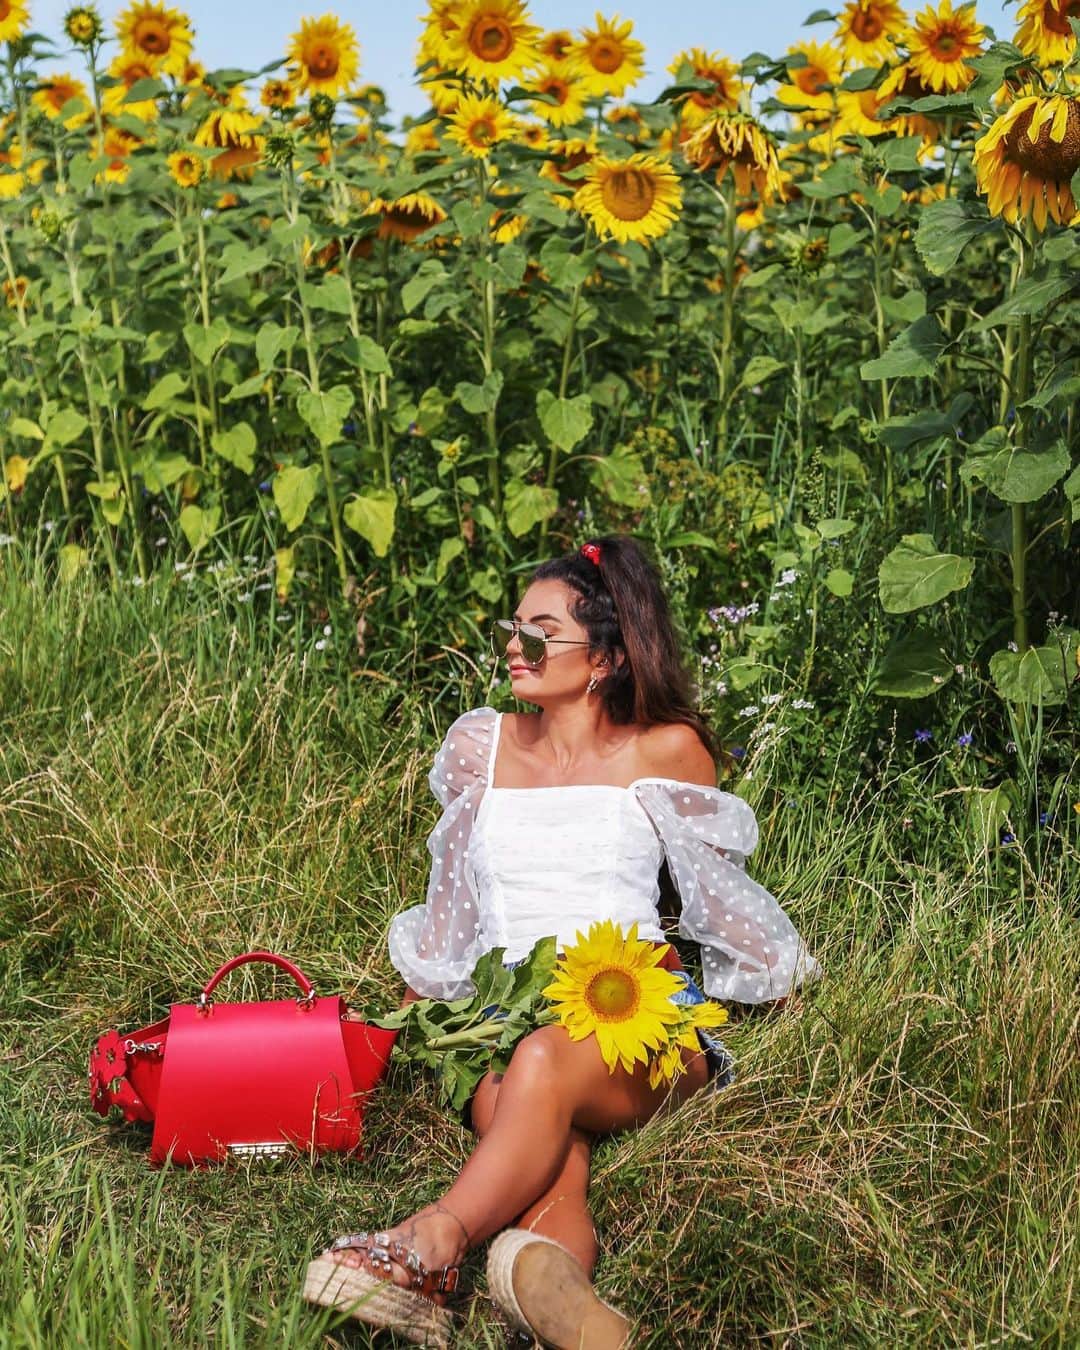 Anniのインスタグラム：「Advice from a sunflower: Be bright, sunny and positive. Spread seeds of happiness. Rise, shine, and hold your head high 🌾🌻☀️✨❤️💋#happysunday #weekendvibes {outfit post is up on my blog}——————————————————————————— • • • • •  #outfit #fashion #fashionblogger #ootd  #shopbop #fashionblogger_de #blogger #inspiration #inspo #girl #me #look #ig #kissinfashion #americanstyle #stuttgart #liketkit #love #germany #naturelover」